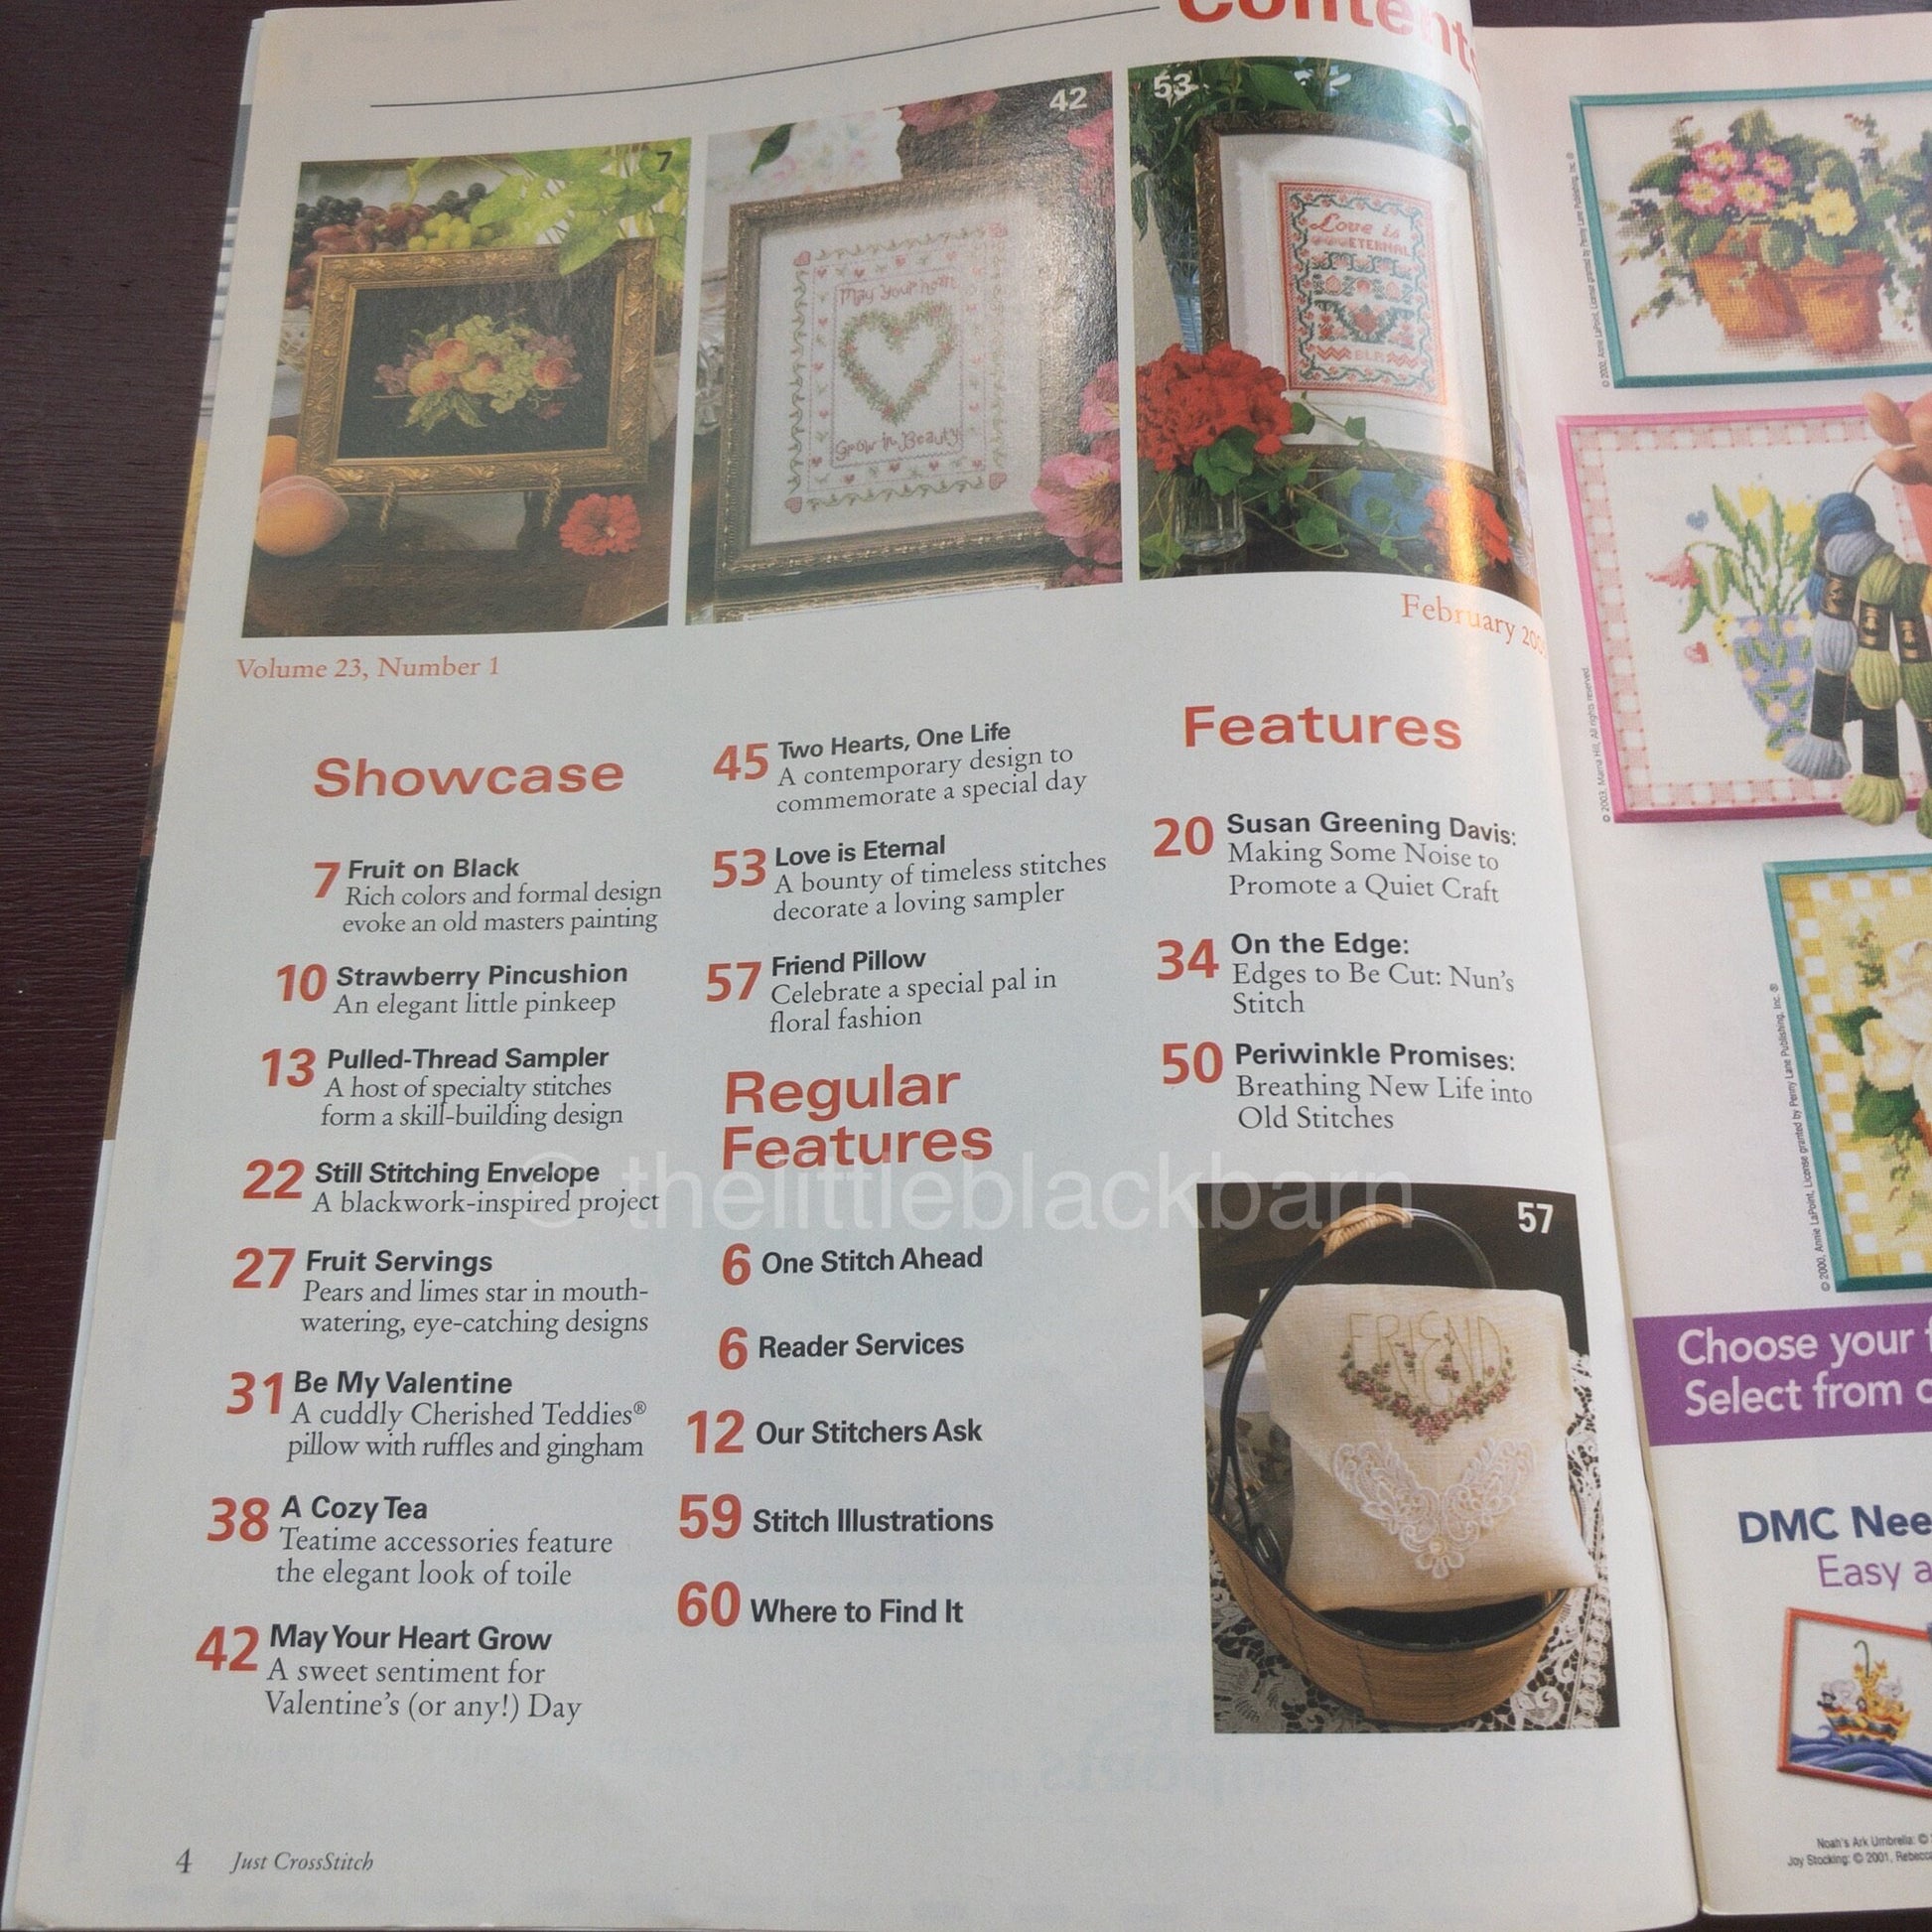 Just Cross Stitch Magazine 2005, 3 Issues, See Description*